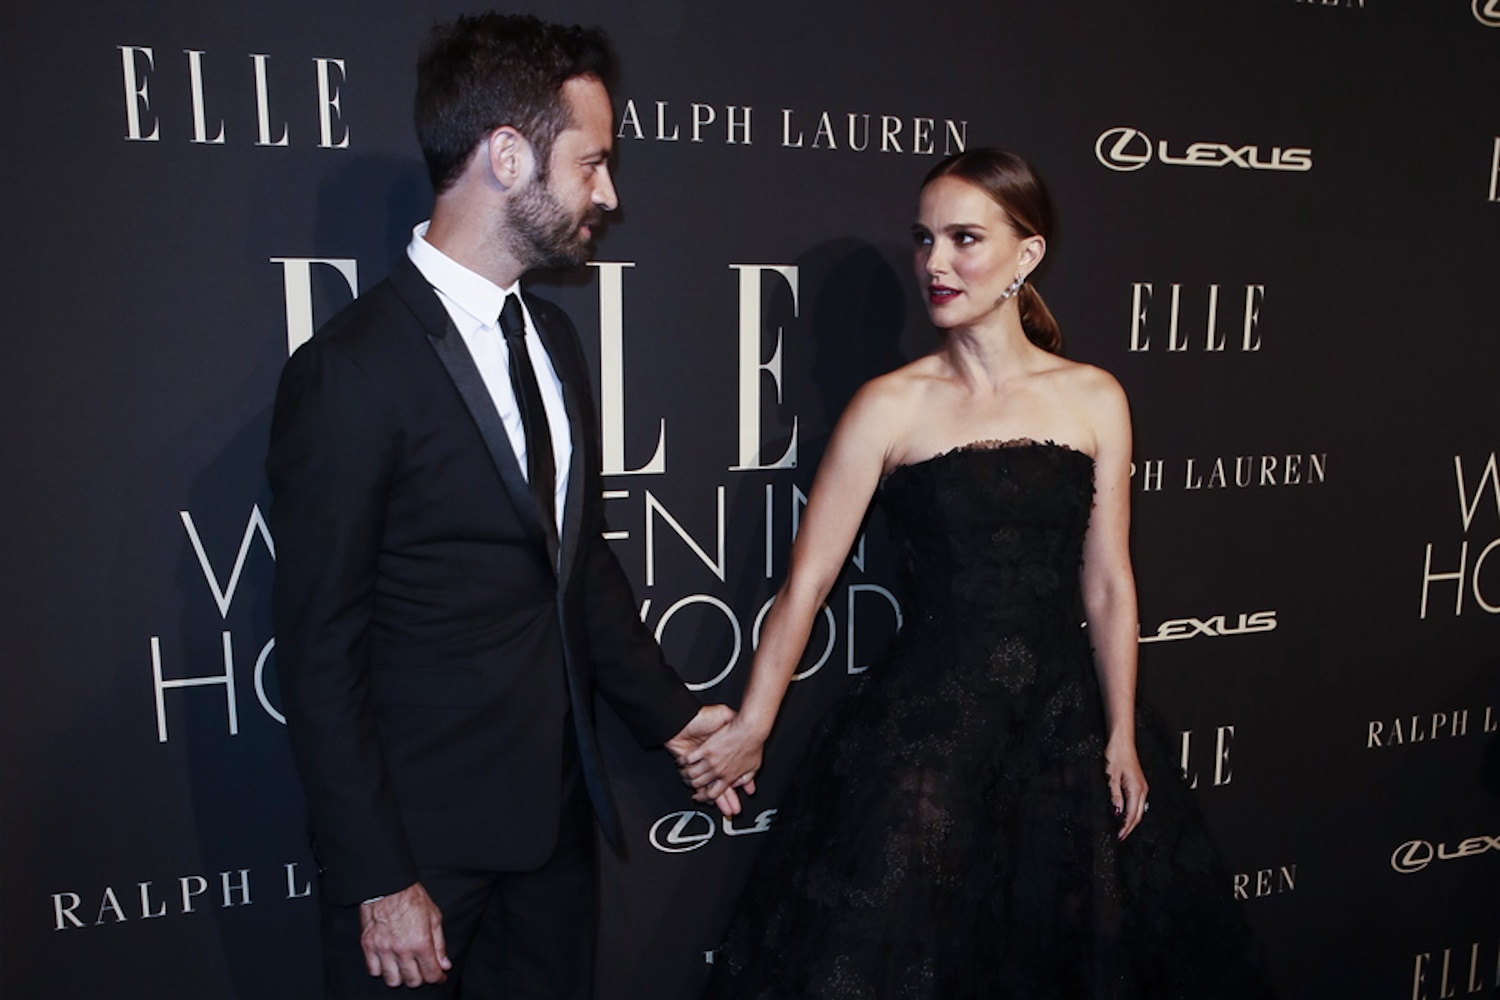 Natalie Portman gets divorced after 11 years of marriage - Rumors of ...